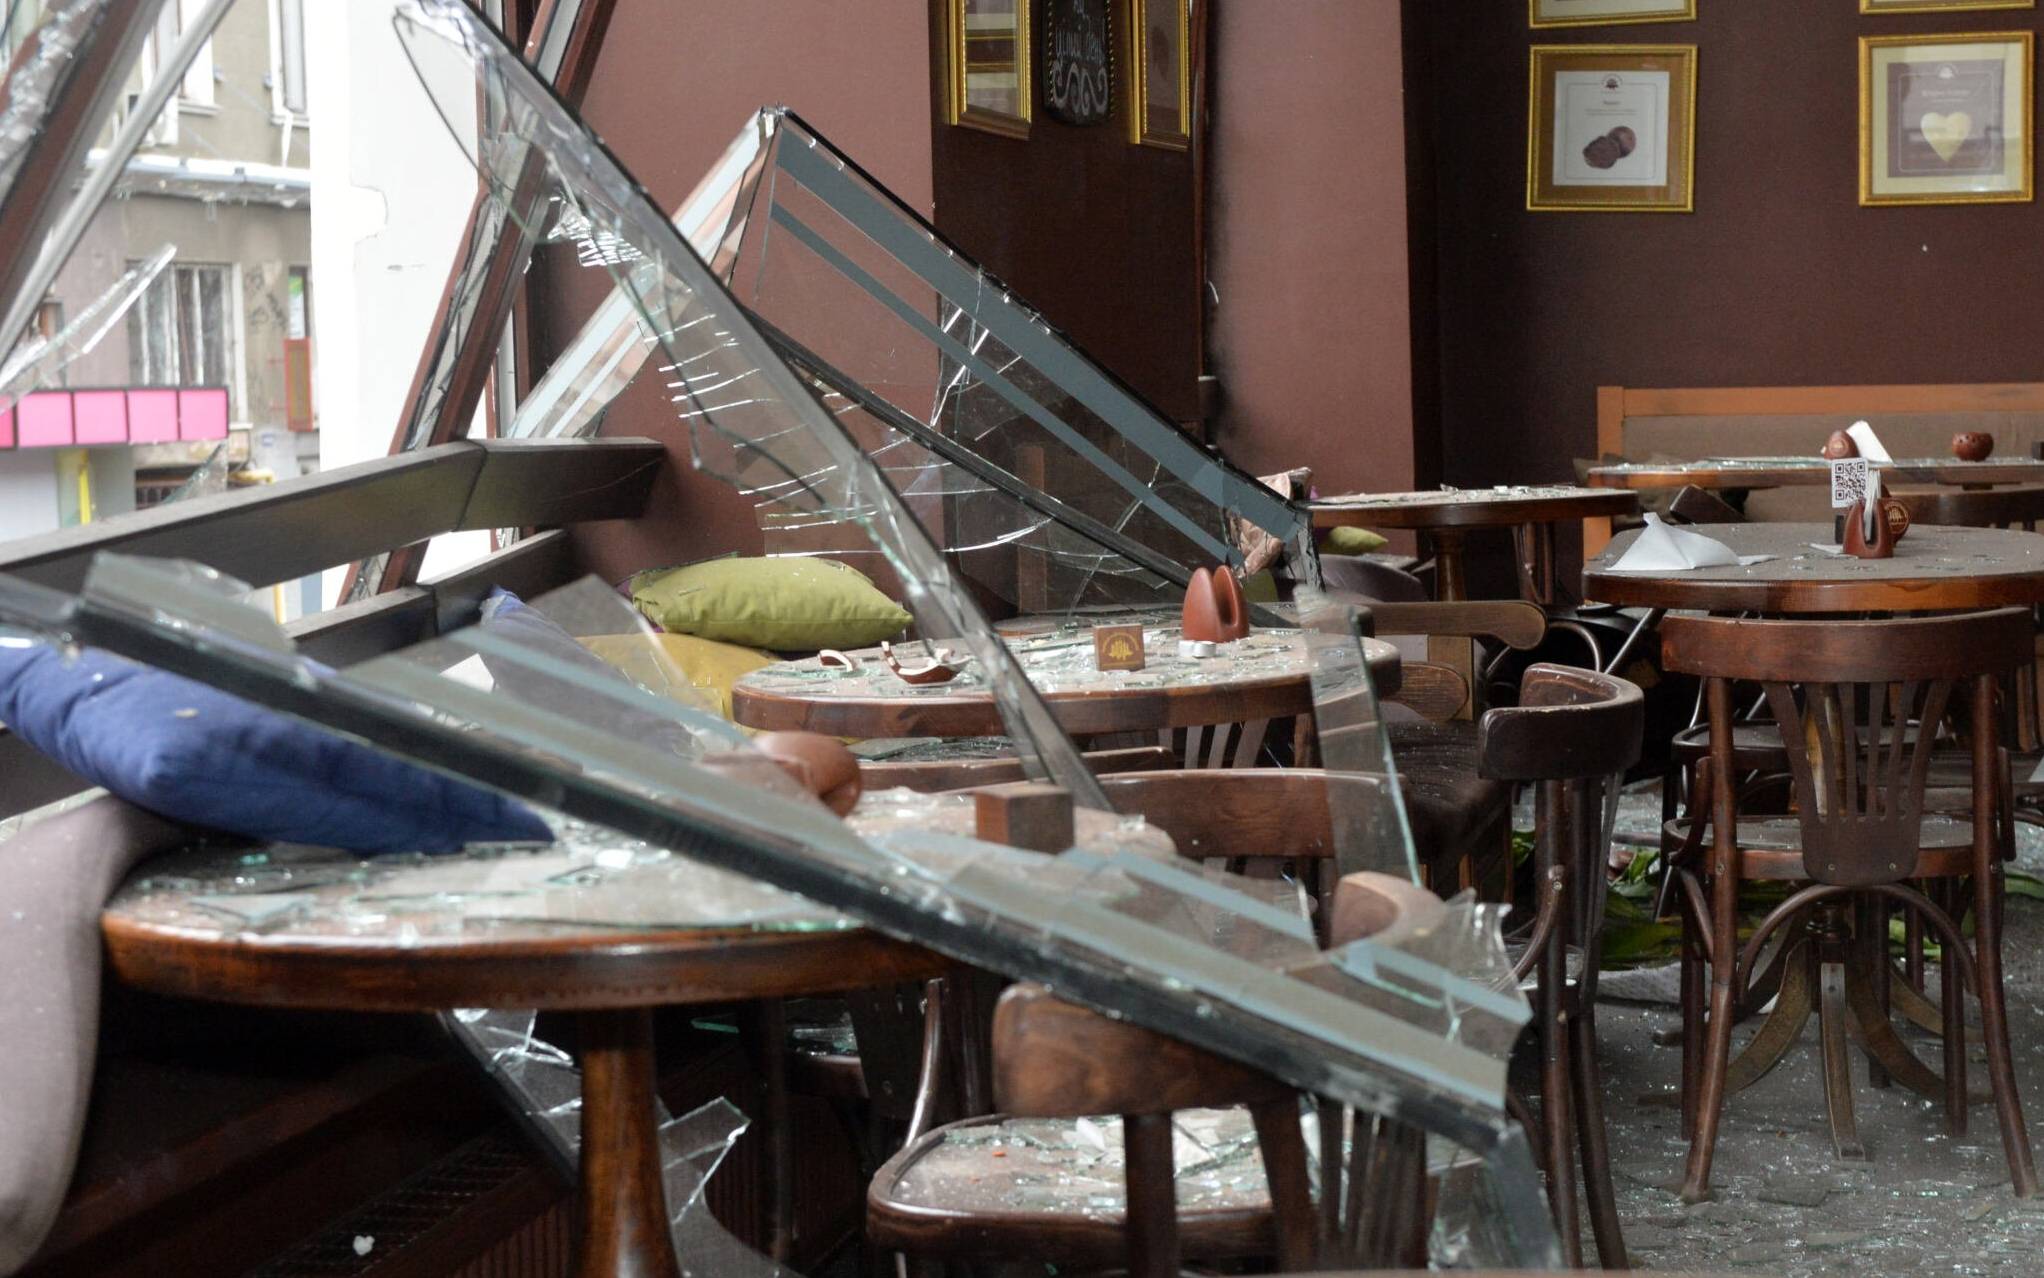 A picture shows the destroyed interior of a cafe after the shelling by Russian forces of Constitution Square in Kharkiv, Ukraine's second-biggest city, on March 2, 2022. - On the seventh day of fighting in Ukraine on March 2, Russia claims control of the southern port city of Kherson, street battles rage in Ukraine's second-biggest city Kharkiv, and Kyiv braces for a feared Russian assault. (Photo by Sergey BOBOK / AFP)